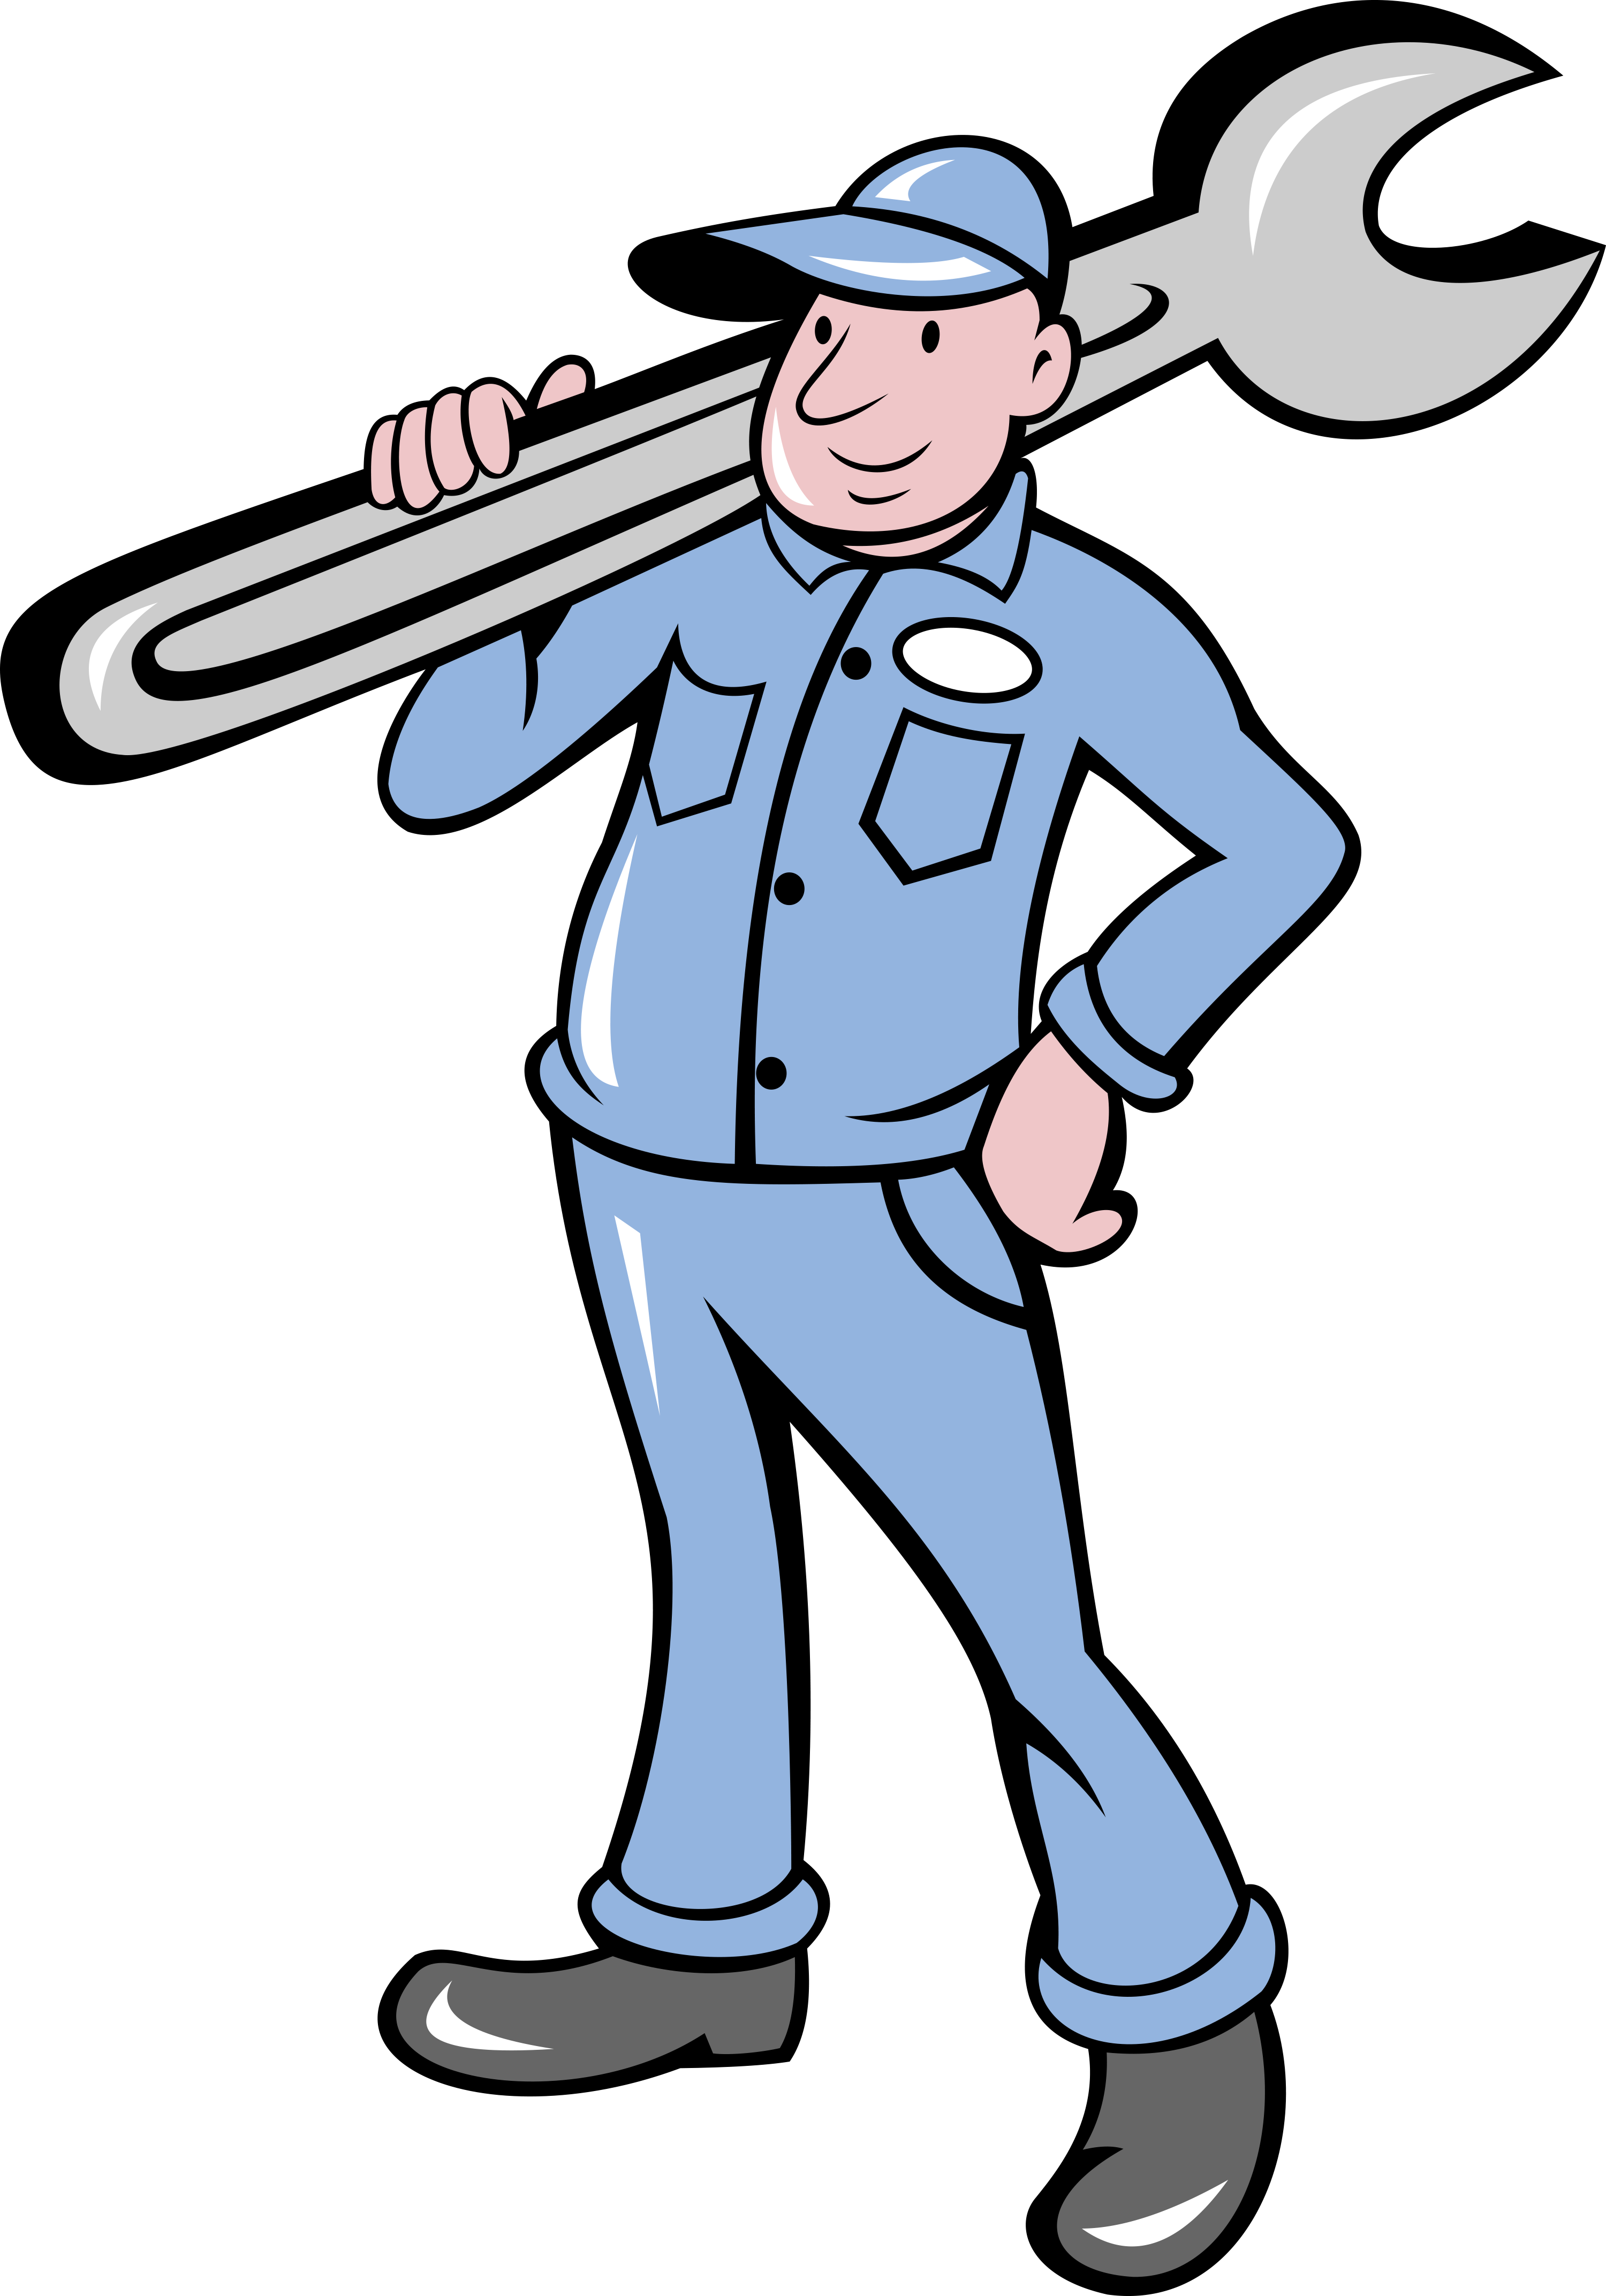 Mechanic clipart wrench, Mechanic wrench Transparent FREE for download ...